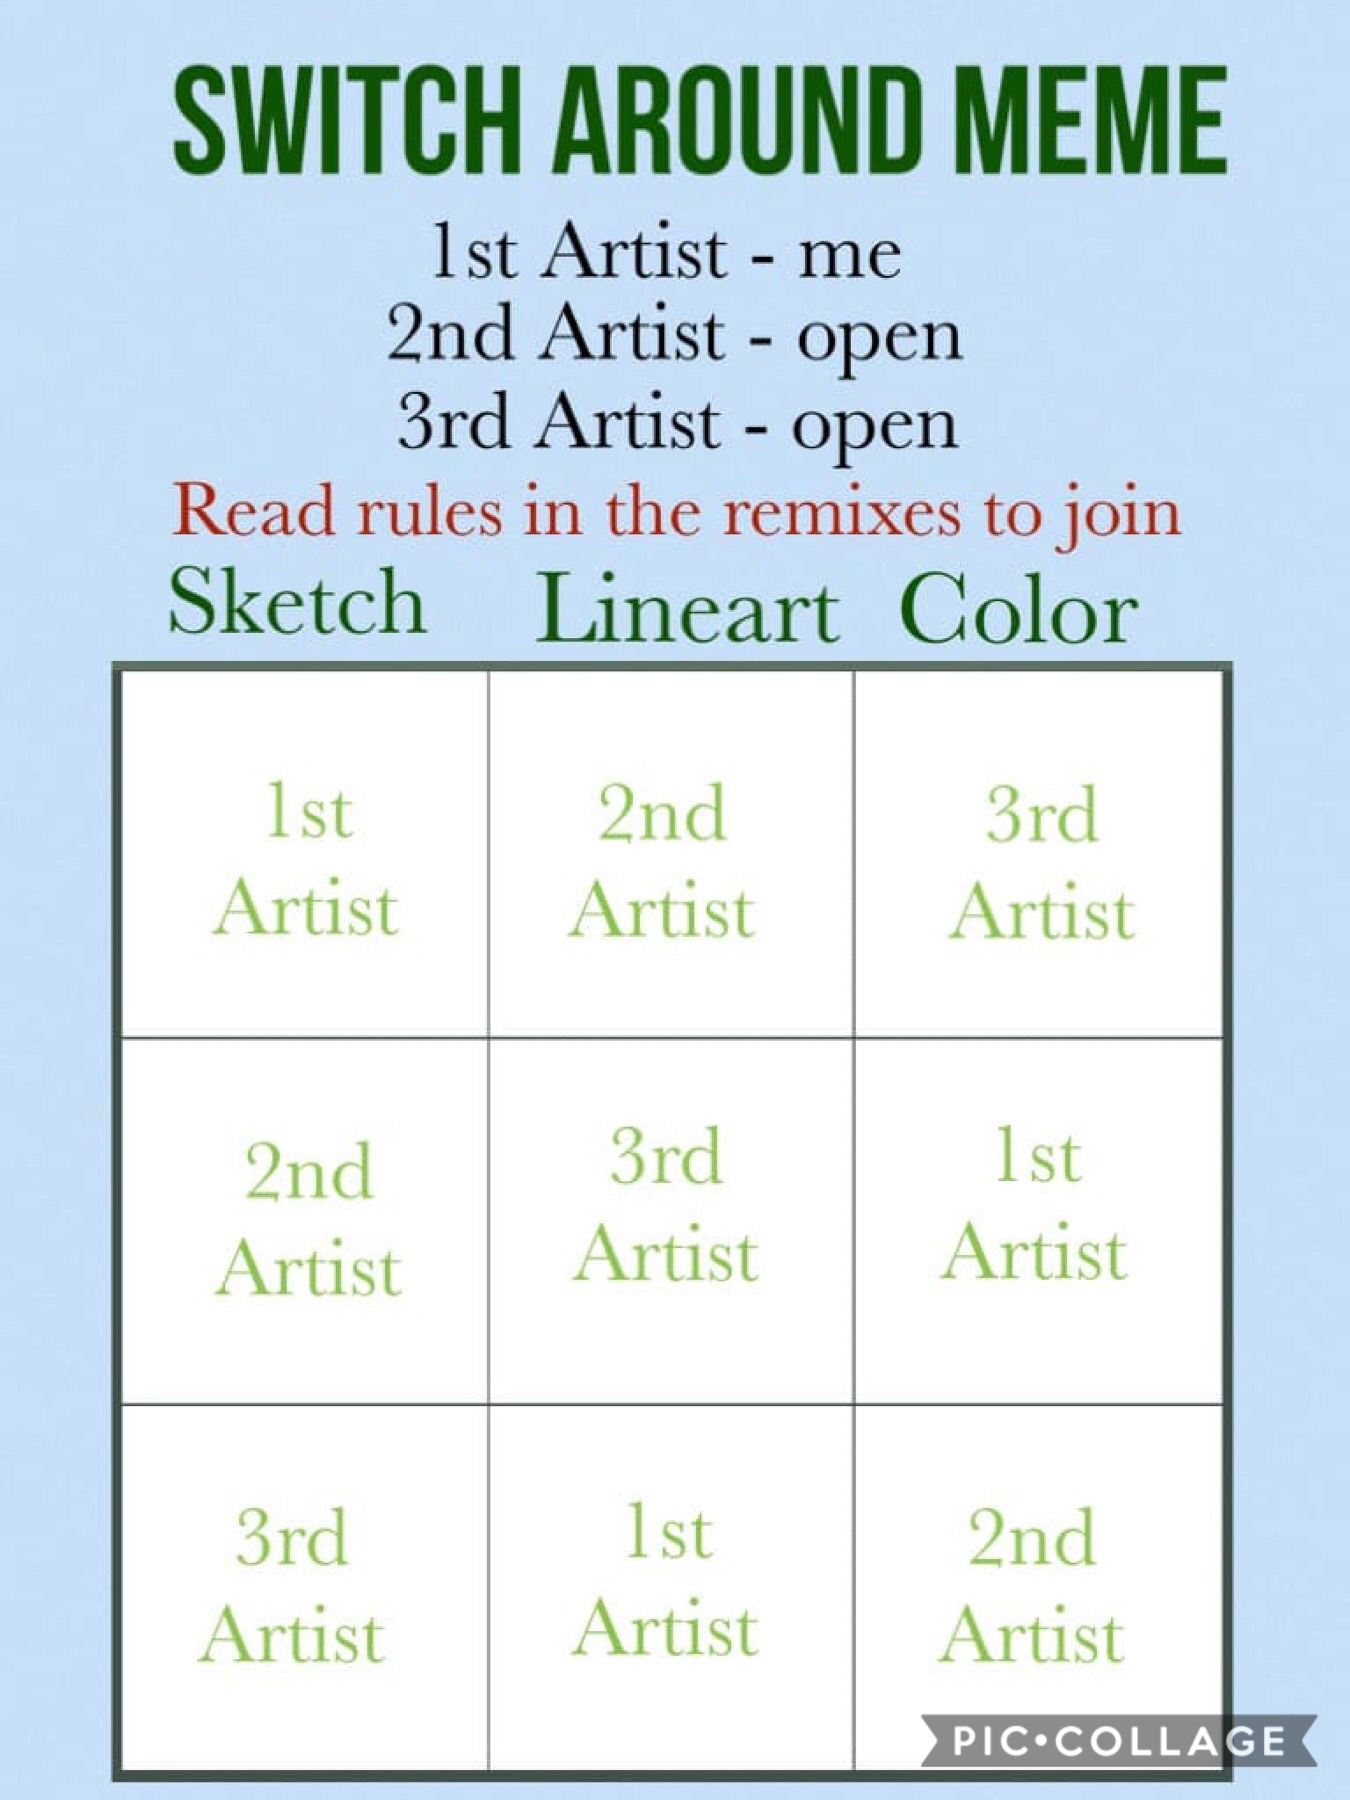 TAP
Please read all the rules in the remixes! Only two people can join and only join if you can commit to finishing!